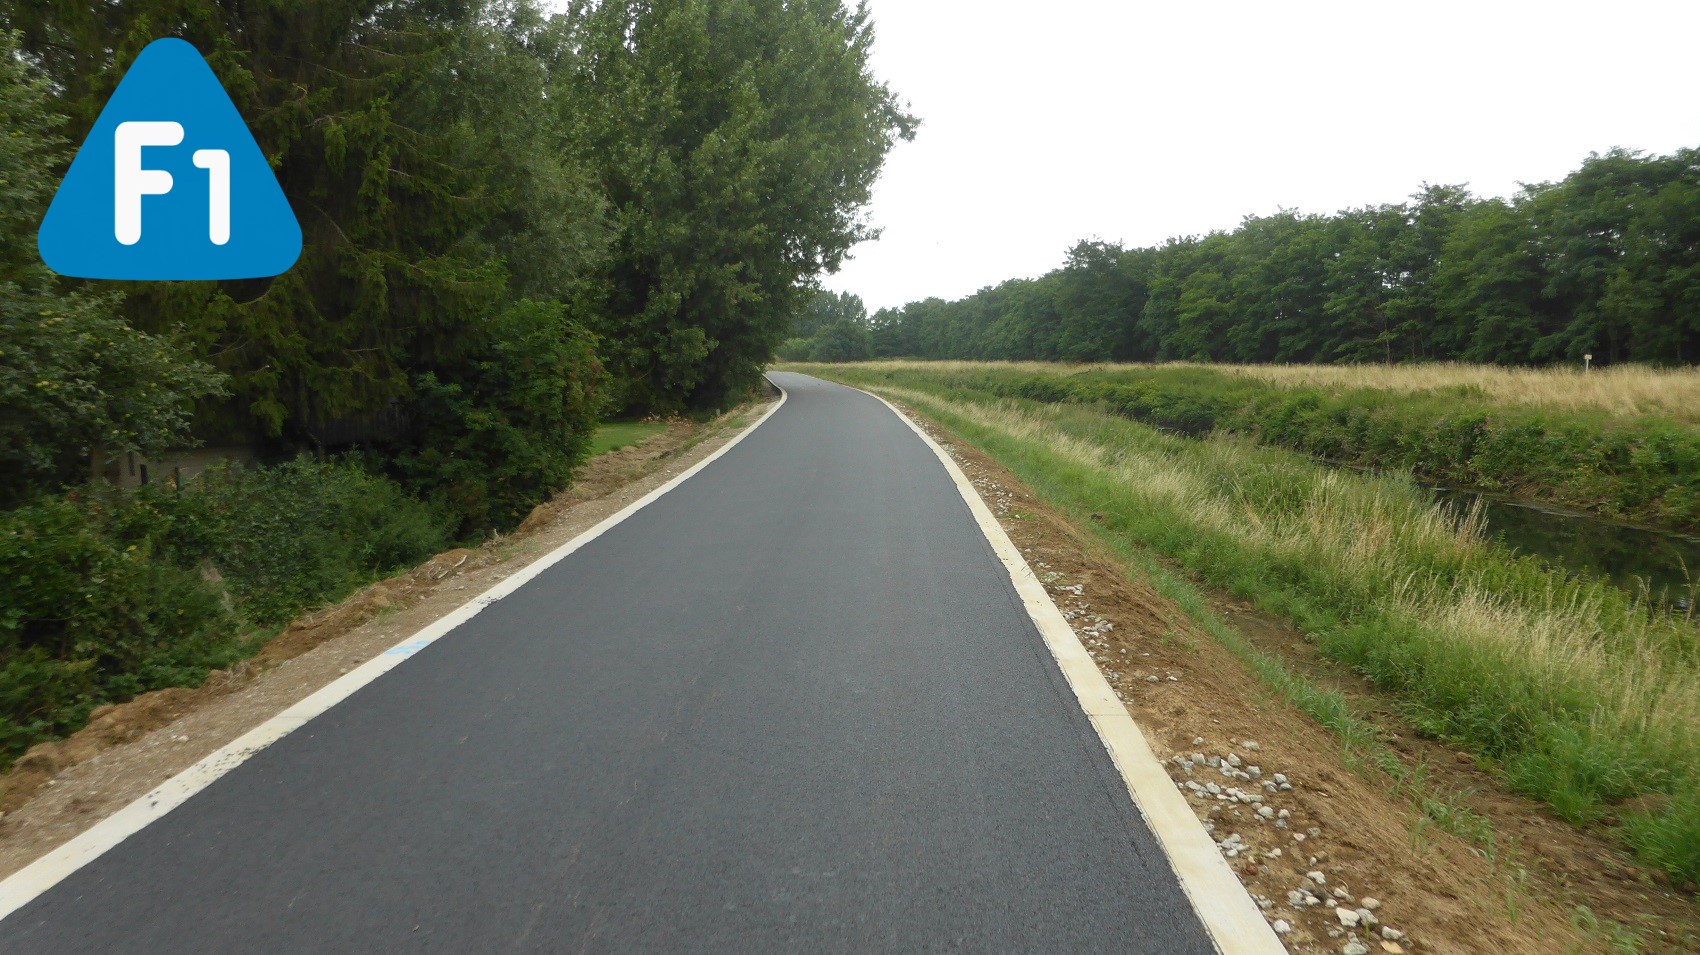 New section of the F1 cycle highway along the river Zenne near Zemst.